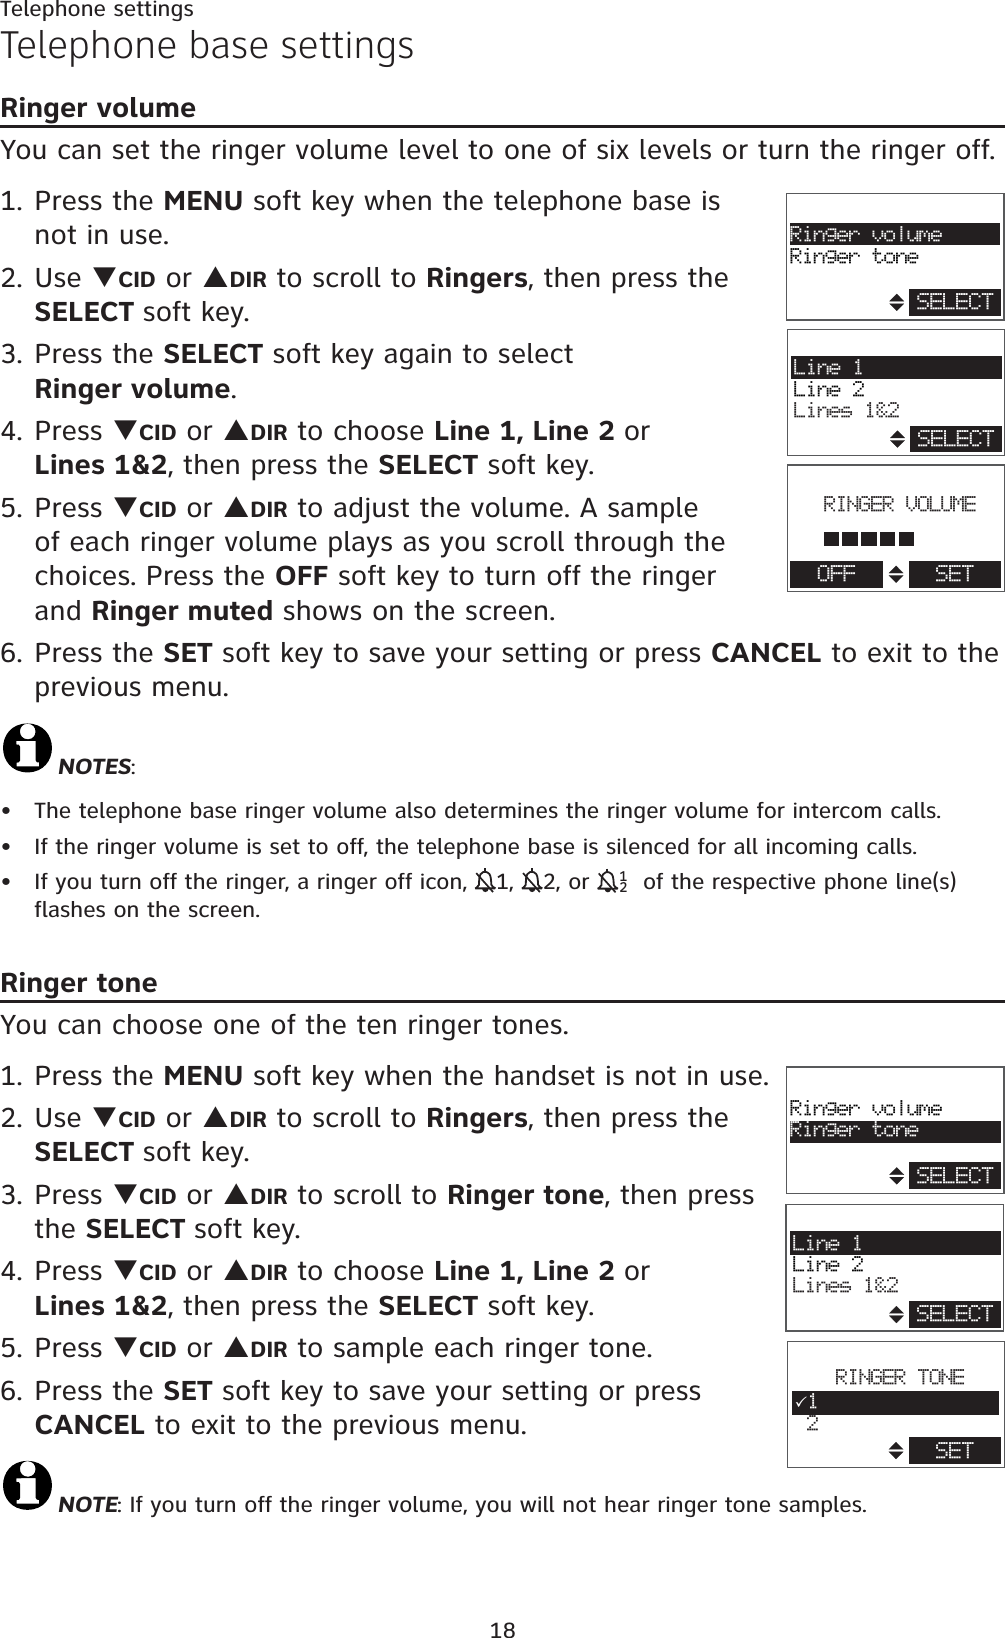 18Telephone settingsTelephone base settingsRinger volumeYou can set the ringer volume level to one of six levels or turn the ringer off. 1. Press the MENU soft key when the telephone base is not in use.2. Use TCID or SDIR to scroll to Ringers, then press the SELECT soft key.3. Press the SELECT soft key again to select            Ringer volume.4. Press TCID or SDIR to choose Line 1, Line 2 orLines 1&amp;2, then press the SELECT soft key.5. Press TCID or SDIR to adjust the volume. A sample of each ringer volume plays as you scroll through the choices. Press the OFF soft key to turn off the ringer and Ringer muted shows on the screen.6. Press the SET soft key to save your setting or press CANCEL to exit to the previous menu.NOTES:The telephone base ringer volume also determines the ringer volume for intercom calls.If the ringer volume is set to off, the telephone base is silenced for all incoming calls.If you turn off the ringer, a ringer off icon, 11,12, or  121 of the respective phone line(s) flashes on the screen. Ringer toneYou can choose one of the ten ringer tones.1. Press the MENU soft key when the handset is not in use.2. Use TCID or SDIR to scroll to Ringers, then press the SELECT soft key.3. Press TCID or SDIR to scroll to Ringer tone, then press the SELECT soft key.4. Press TCID or SDIR to choose Line 1, Line 2 orLines 1&amp;2, then press the SELECT soft key. 5. Press TCID or SDIR to sample each ringer tone.6. Press the SET soft key to save your setting or press CANCEL to exit to the previous menu.NOTE: If you turn off the ringer volume, you will not hear ringer tone samples.•••Line 1Line 2Lines 1&amp;2SELECTRinger volumeRinger toneSELECTRINGER VOLUMEOFF SETLine 1Line 2Lines 1&amp;2SELECTRinger volumeRinger toneSELECTRINGER TONE31 2SET